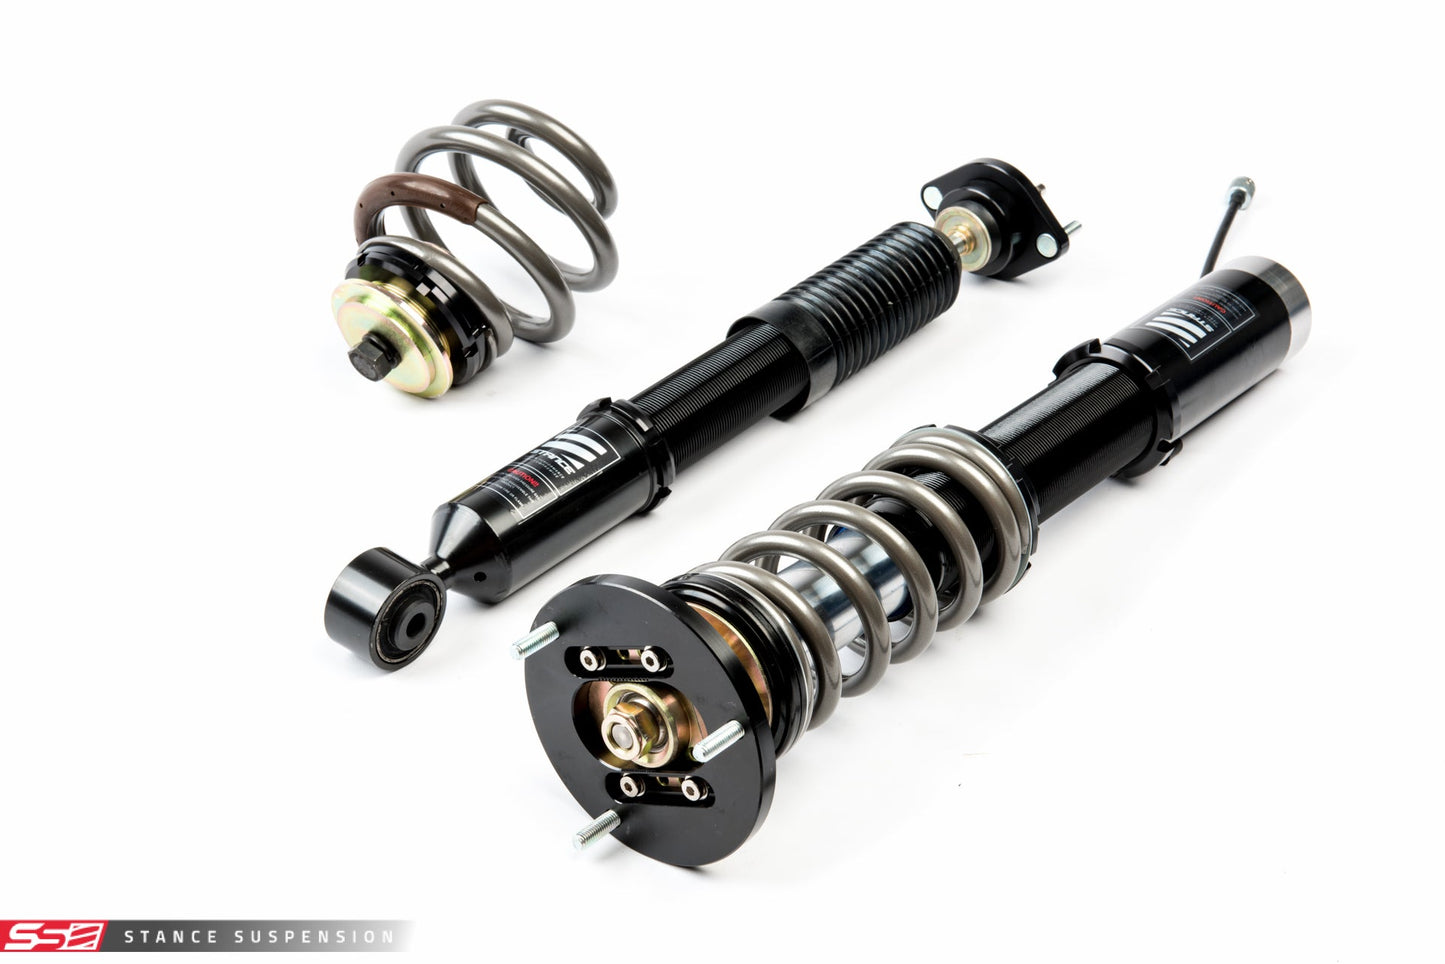 Stance Suspension - XR1 Coilovers for 84-91 BMW M3 E30 (ST-E30-XR1)